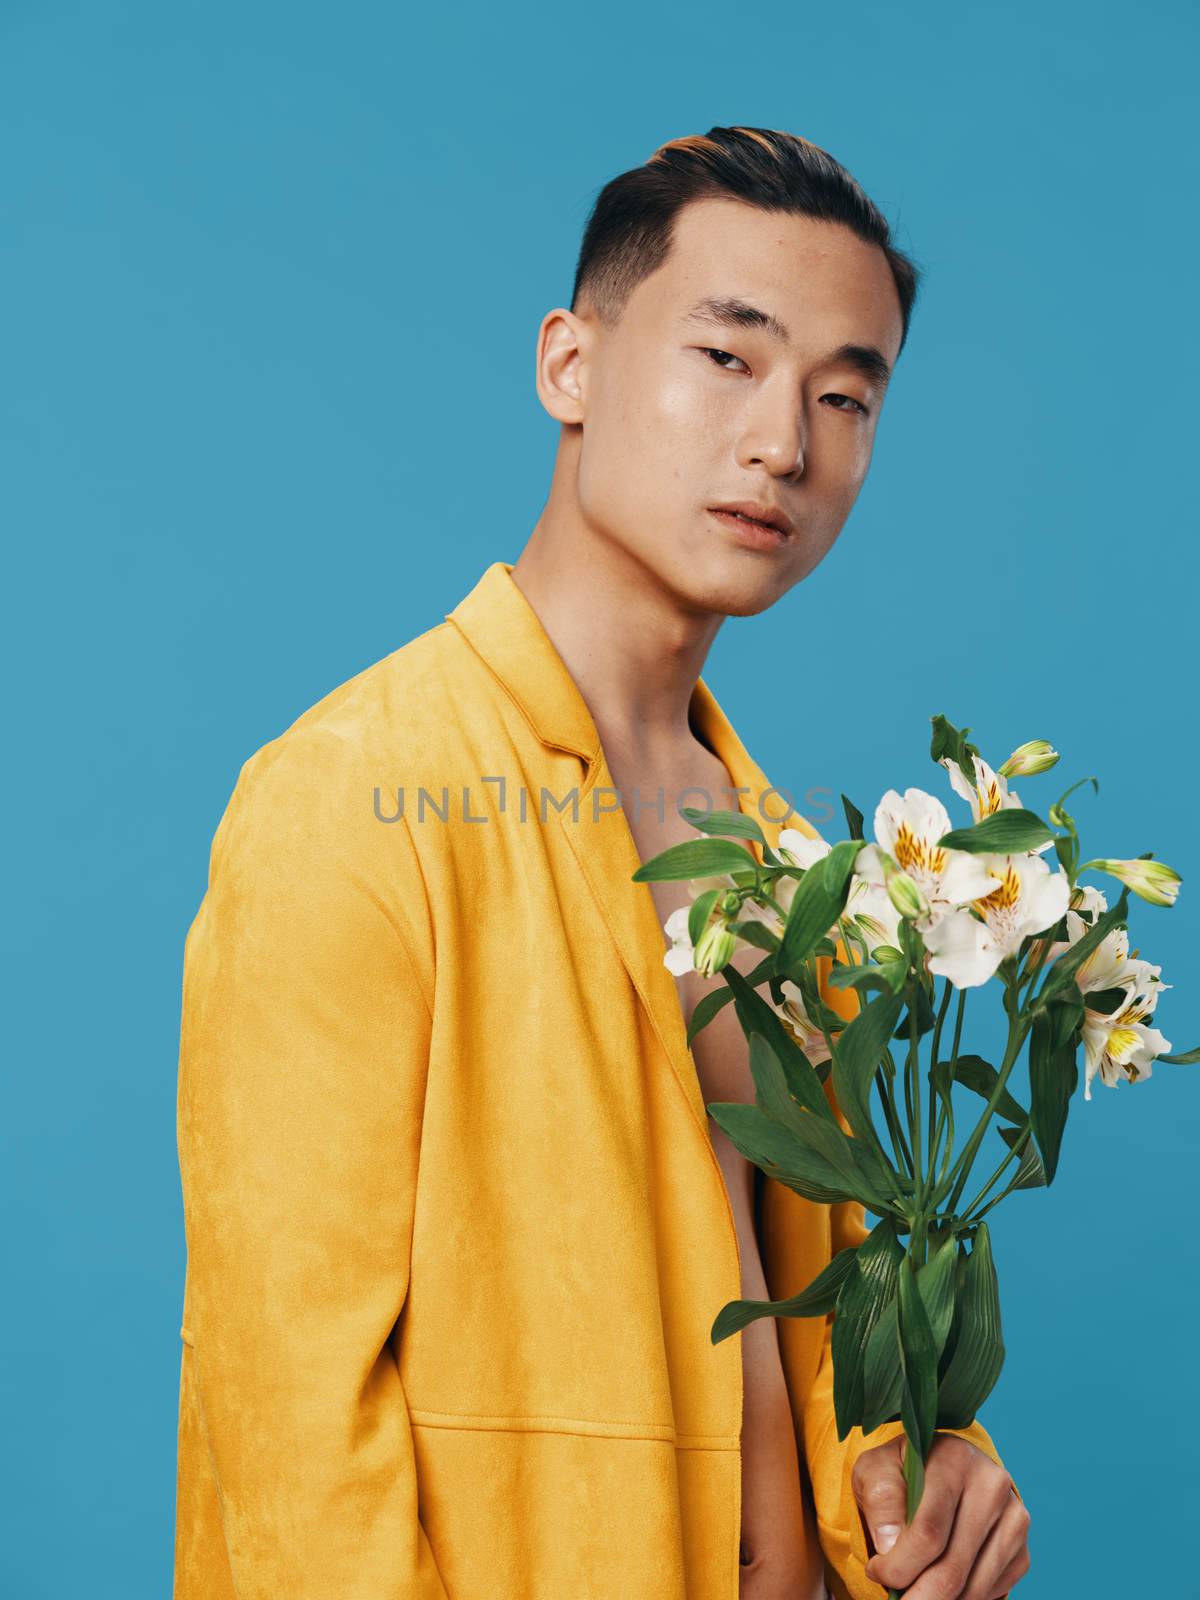 A cute guy of Asian appearance holding a bouquet of white flowers cropped view portrait. High quality photo